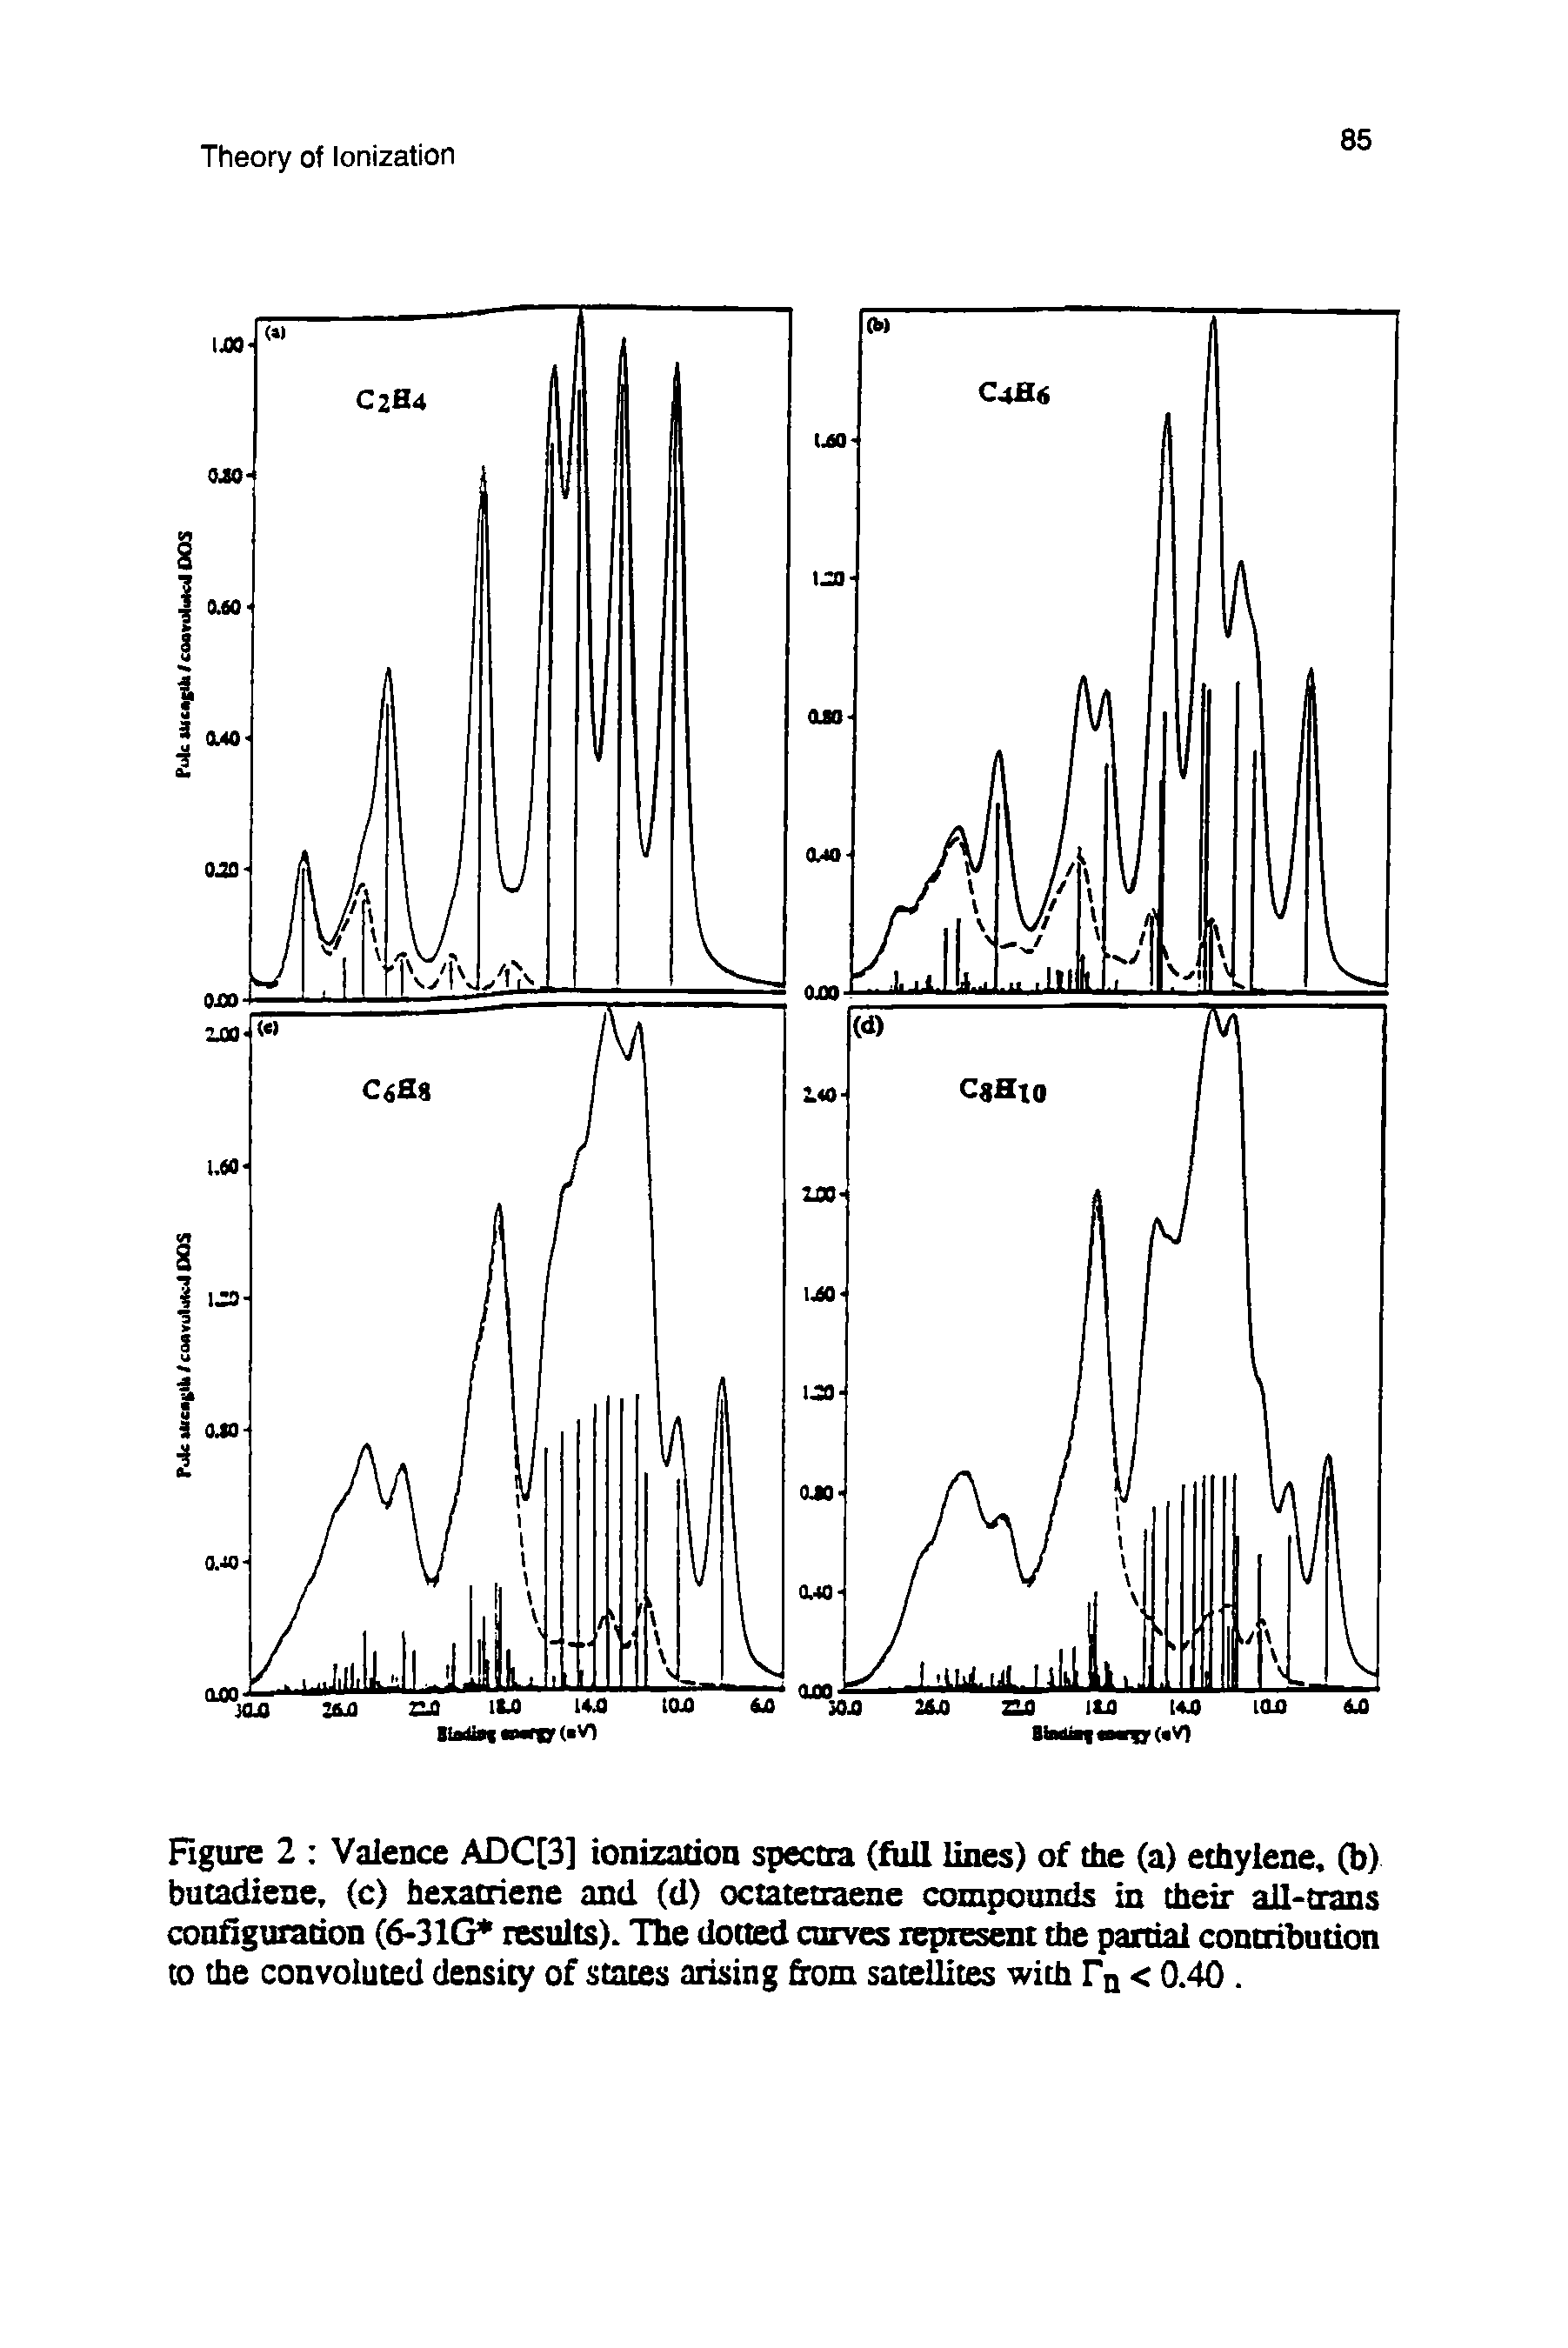 Figure 2 Valence ADC[3] ionization spectra (full lines) of the (a) ethylene, (b) butadiene, (c) hexatriene and (d) octatetiaene compounds in their all-trans configuration (6-31G results). The dotted curves represent the partial contribution to the convoluted density of states arising from satellites with Tq < 0.40. ...